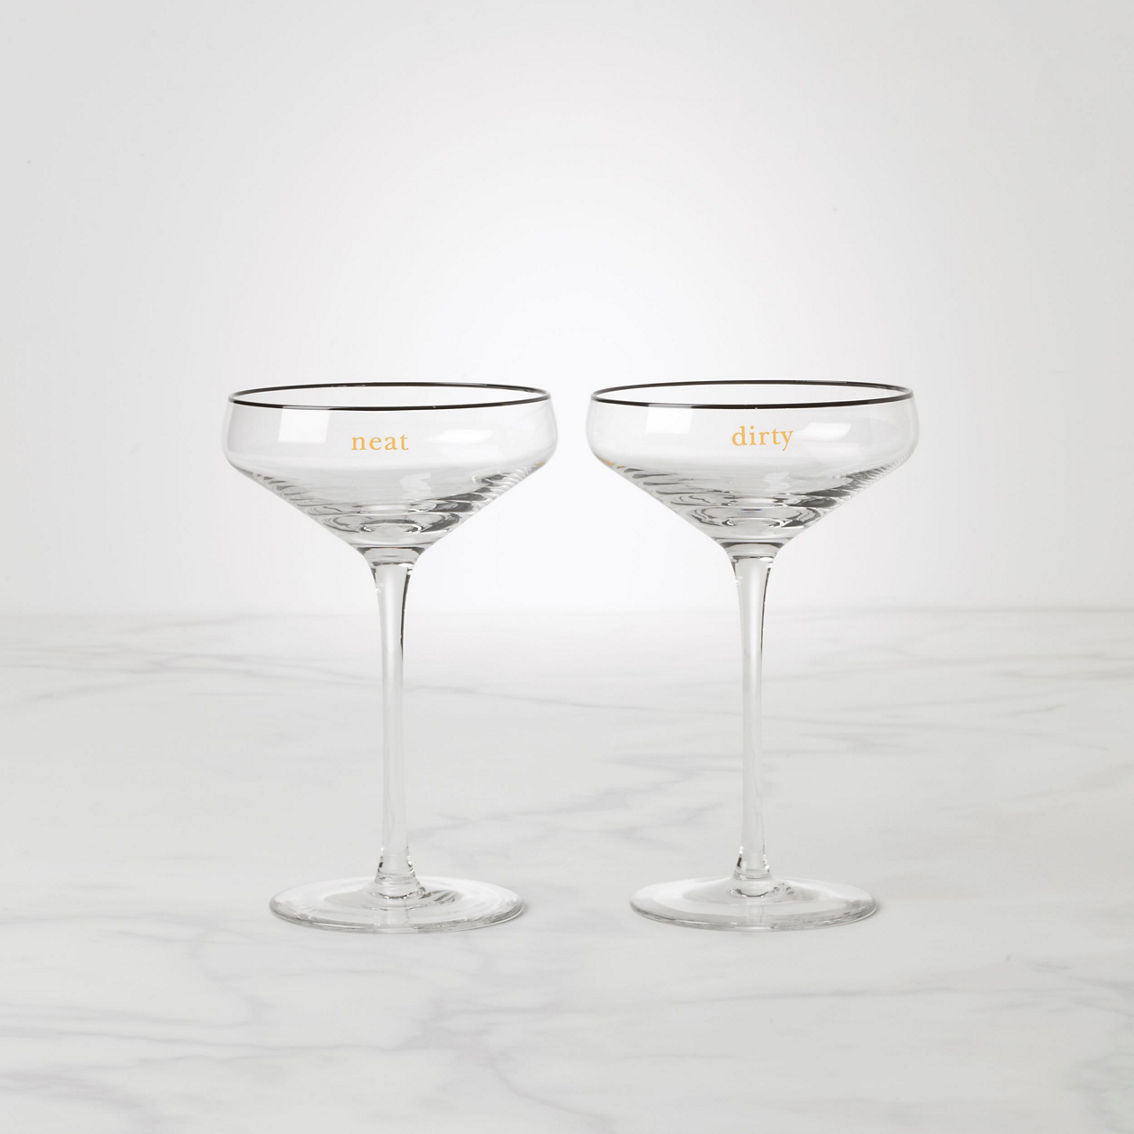 Kate Spade Cheers To Us Dirty and Neat Martini Glasses 2 pc. Set - Image 2 of 2